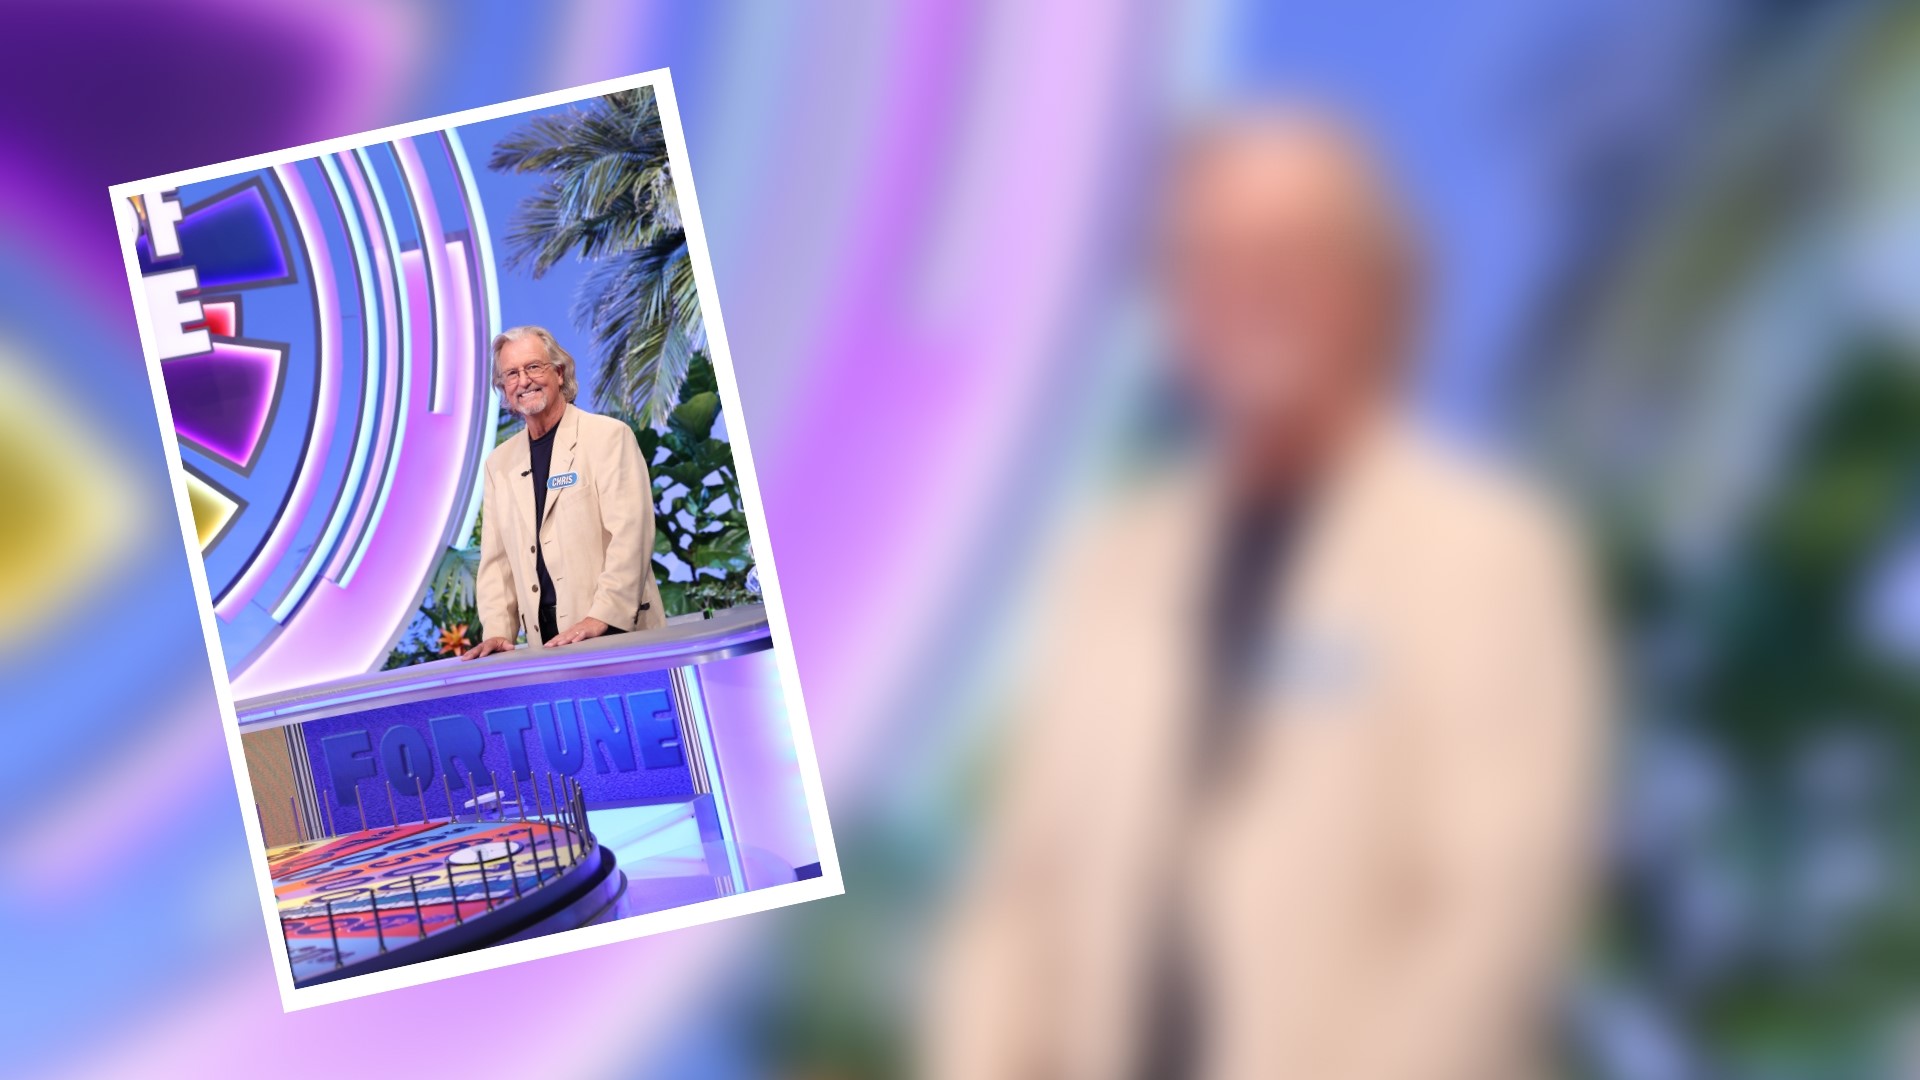 A born-and-raised Holland man hoped to make West Michigan proud with an appearance on Wheel of Fortune in April.